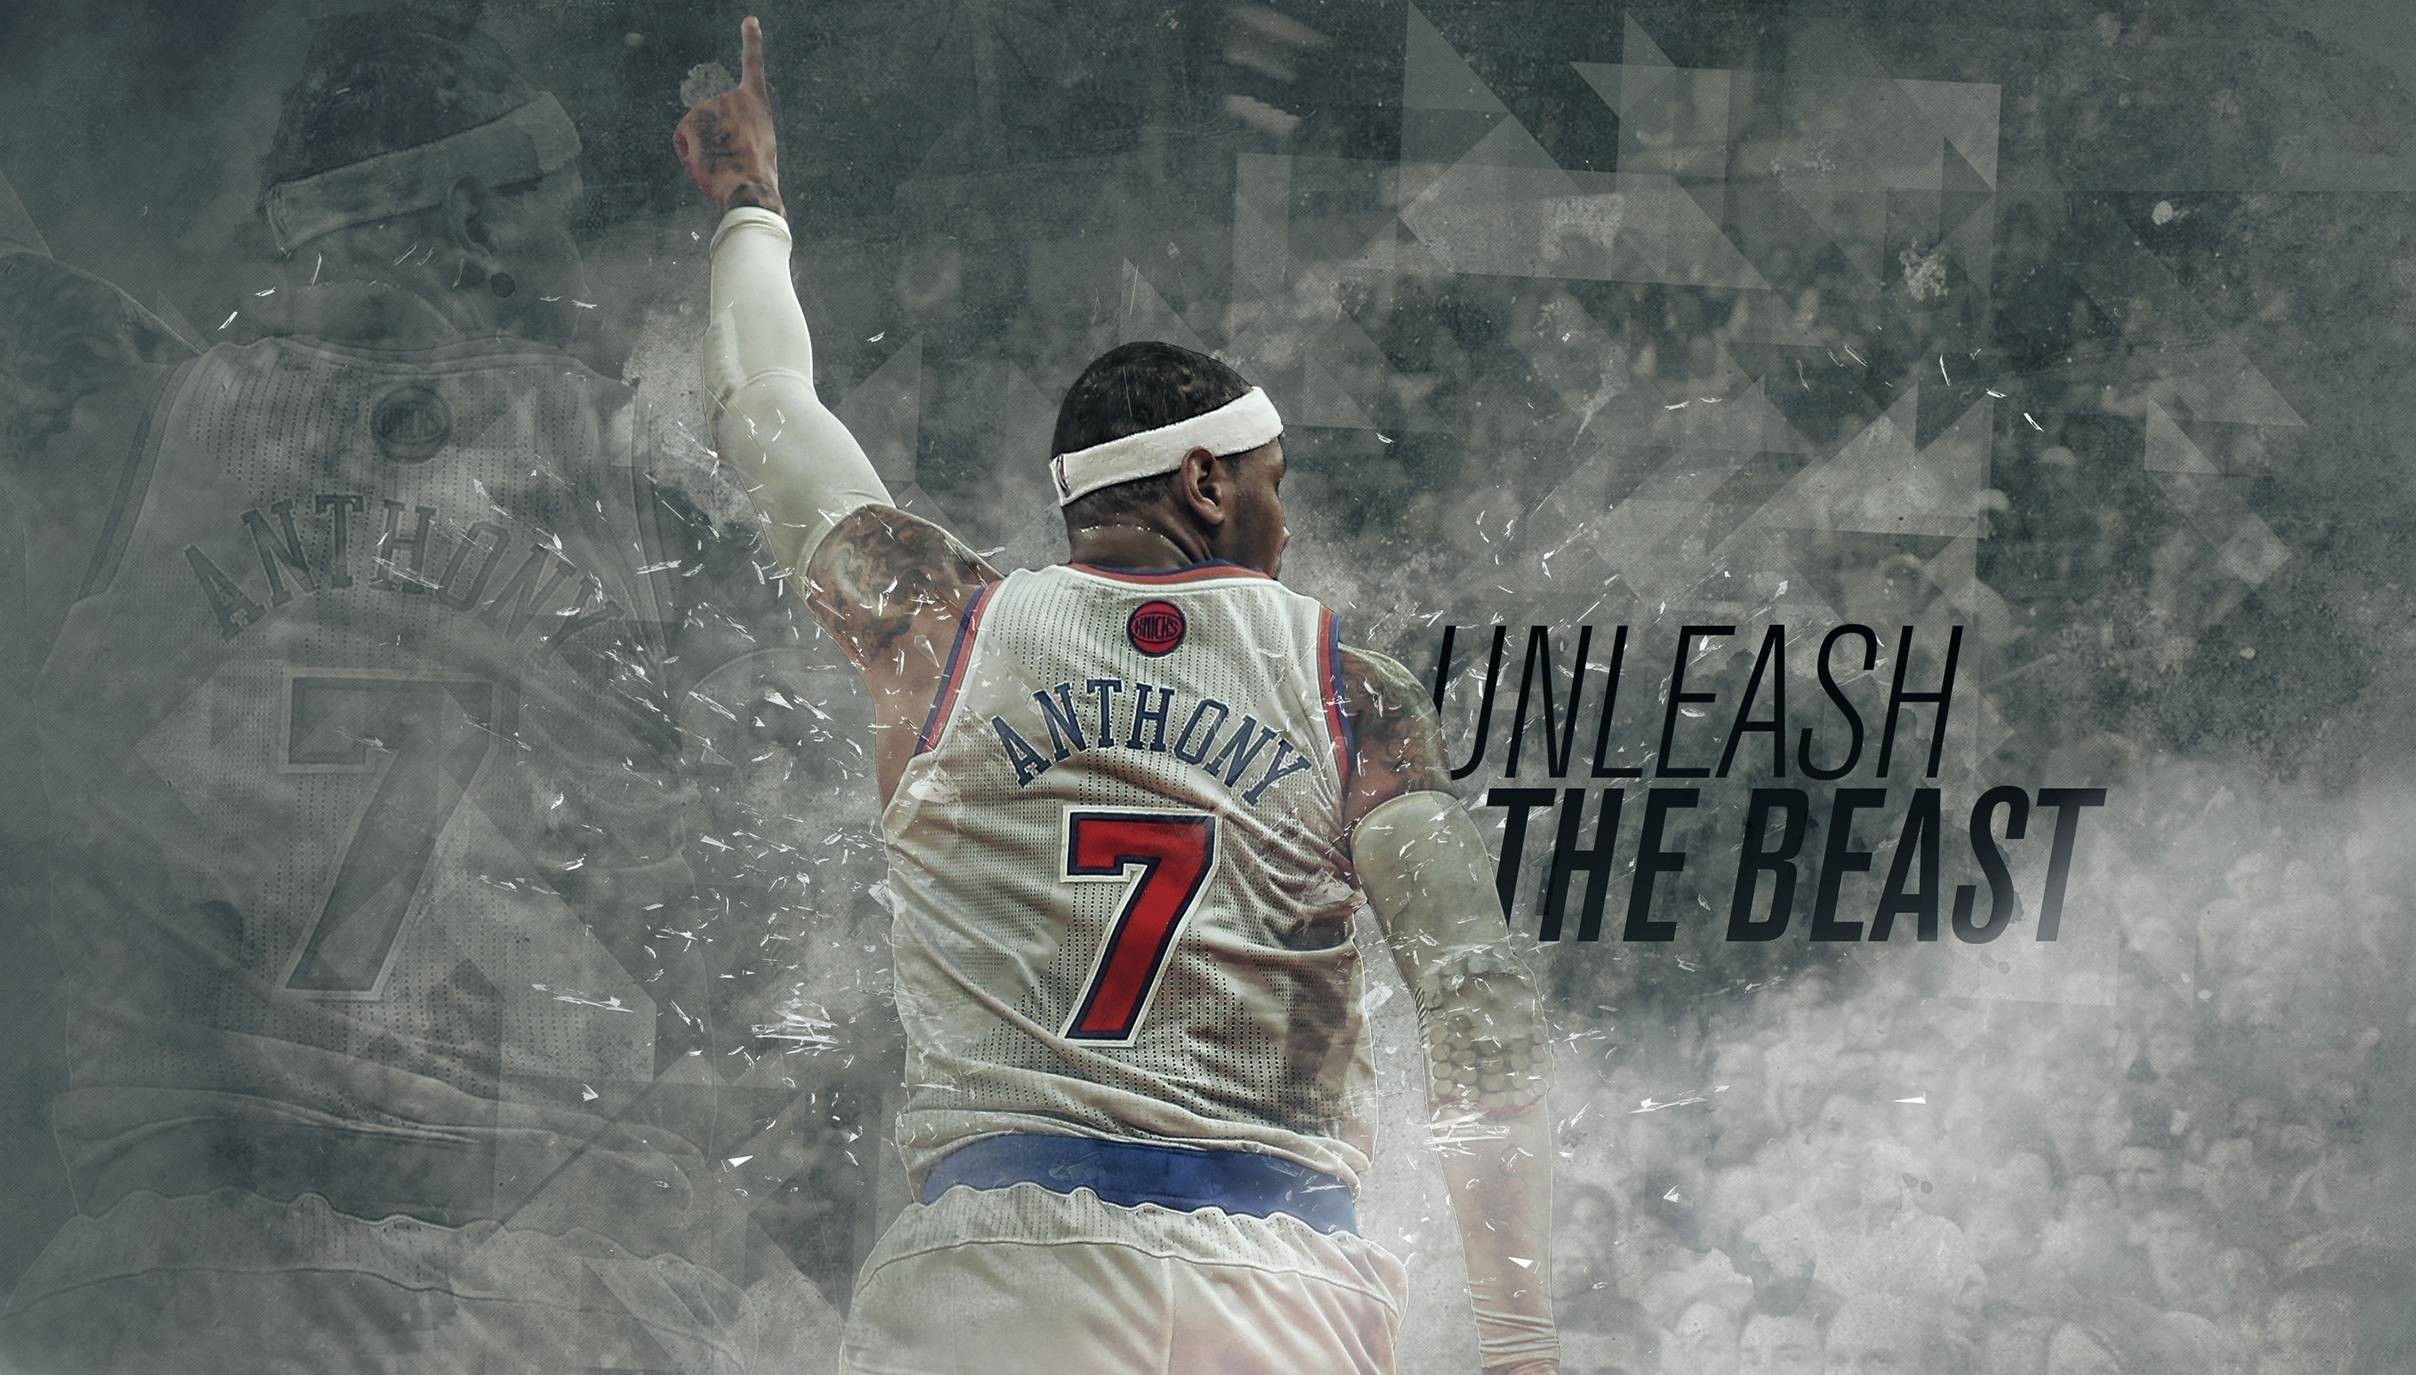 2416x1375 Carmelo Anthony Wallpapers 2015 HD - Wallpaper Cave